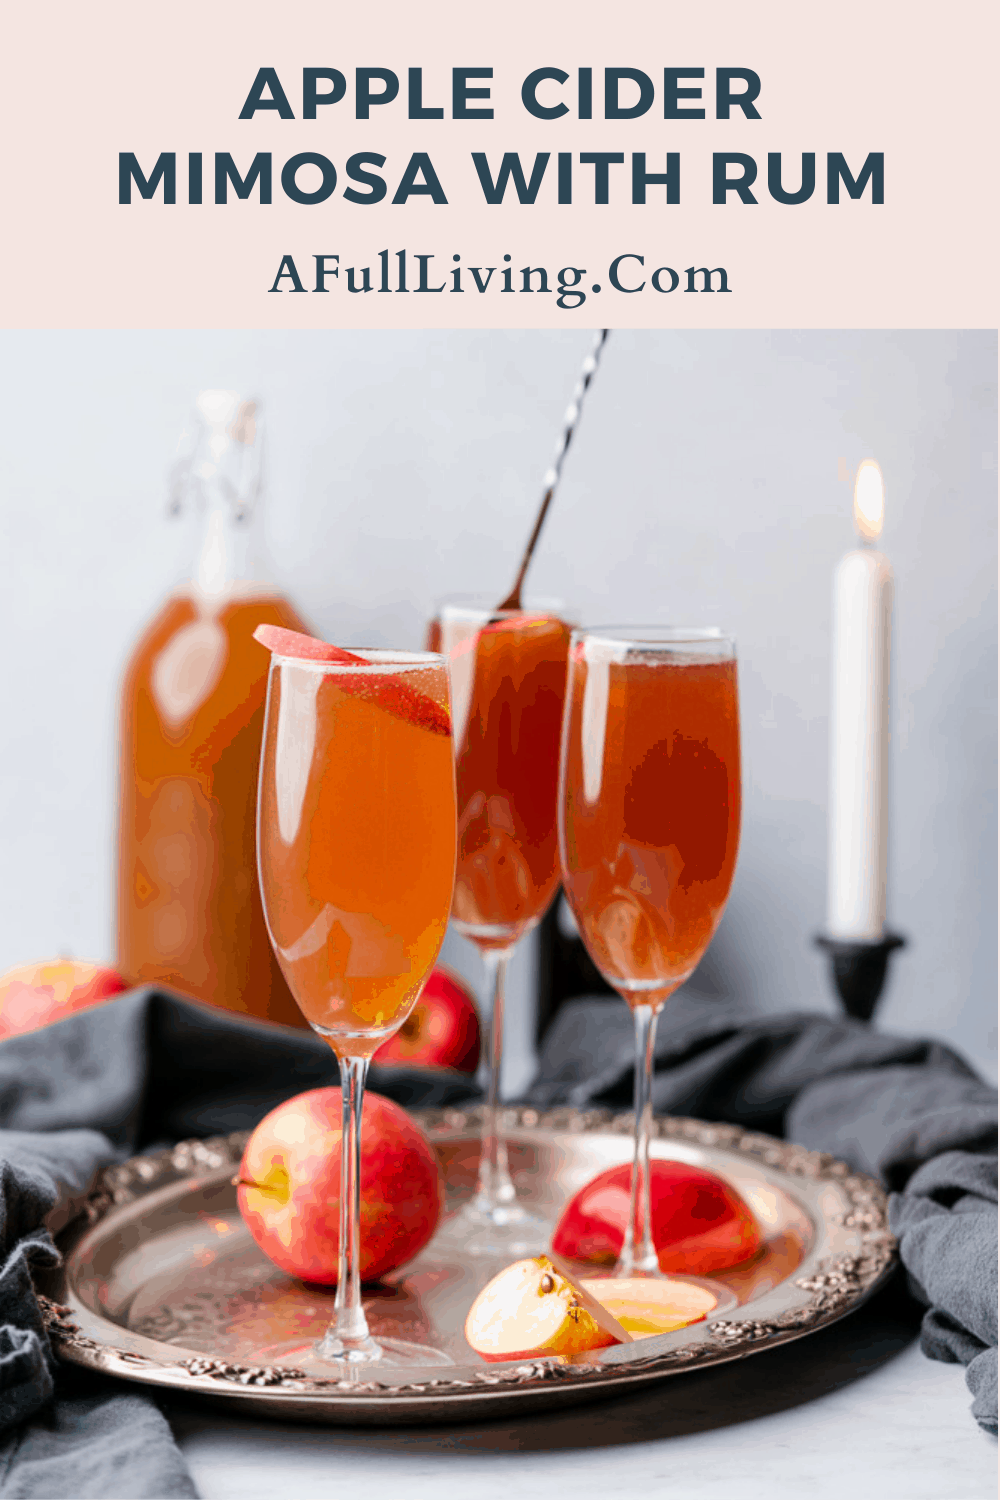 apple cider mimosa with rum recipe